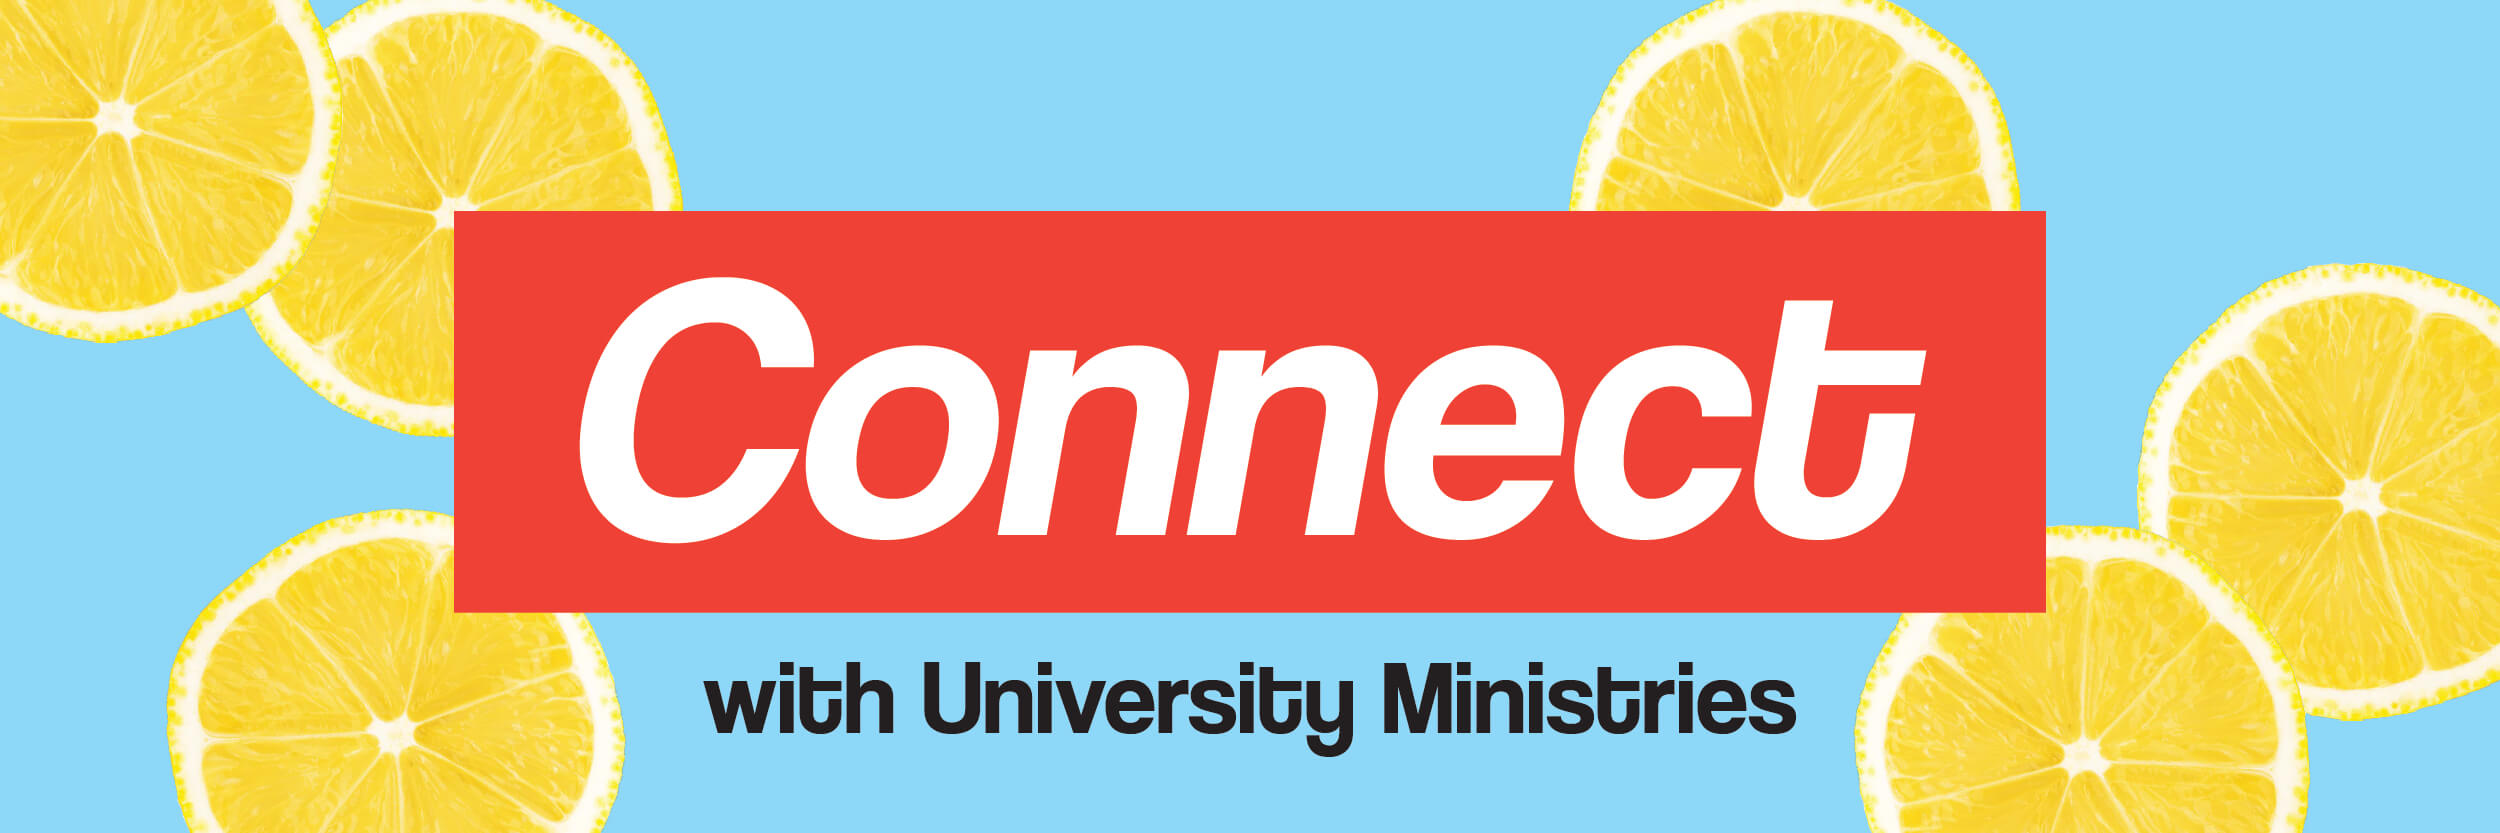 Connect with University Ministries Spring Quarter 2020